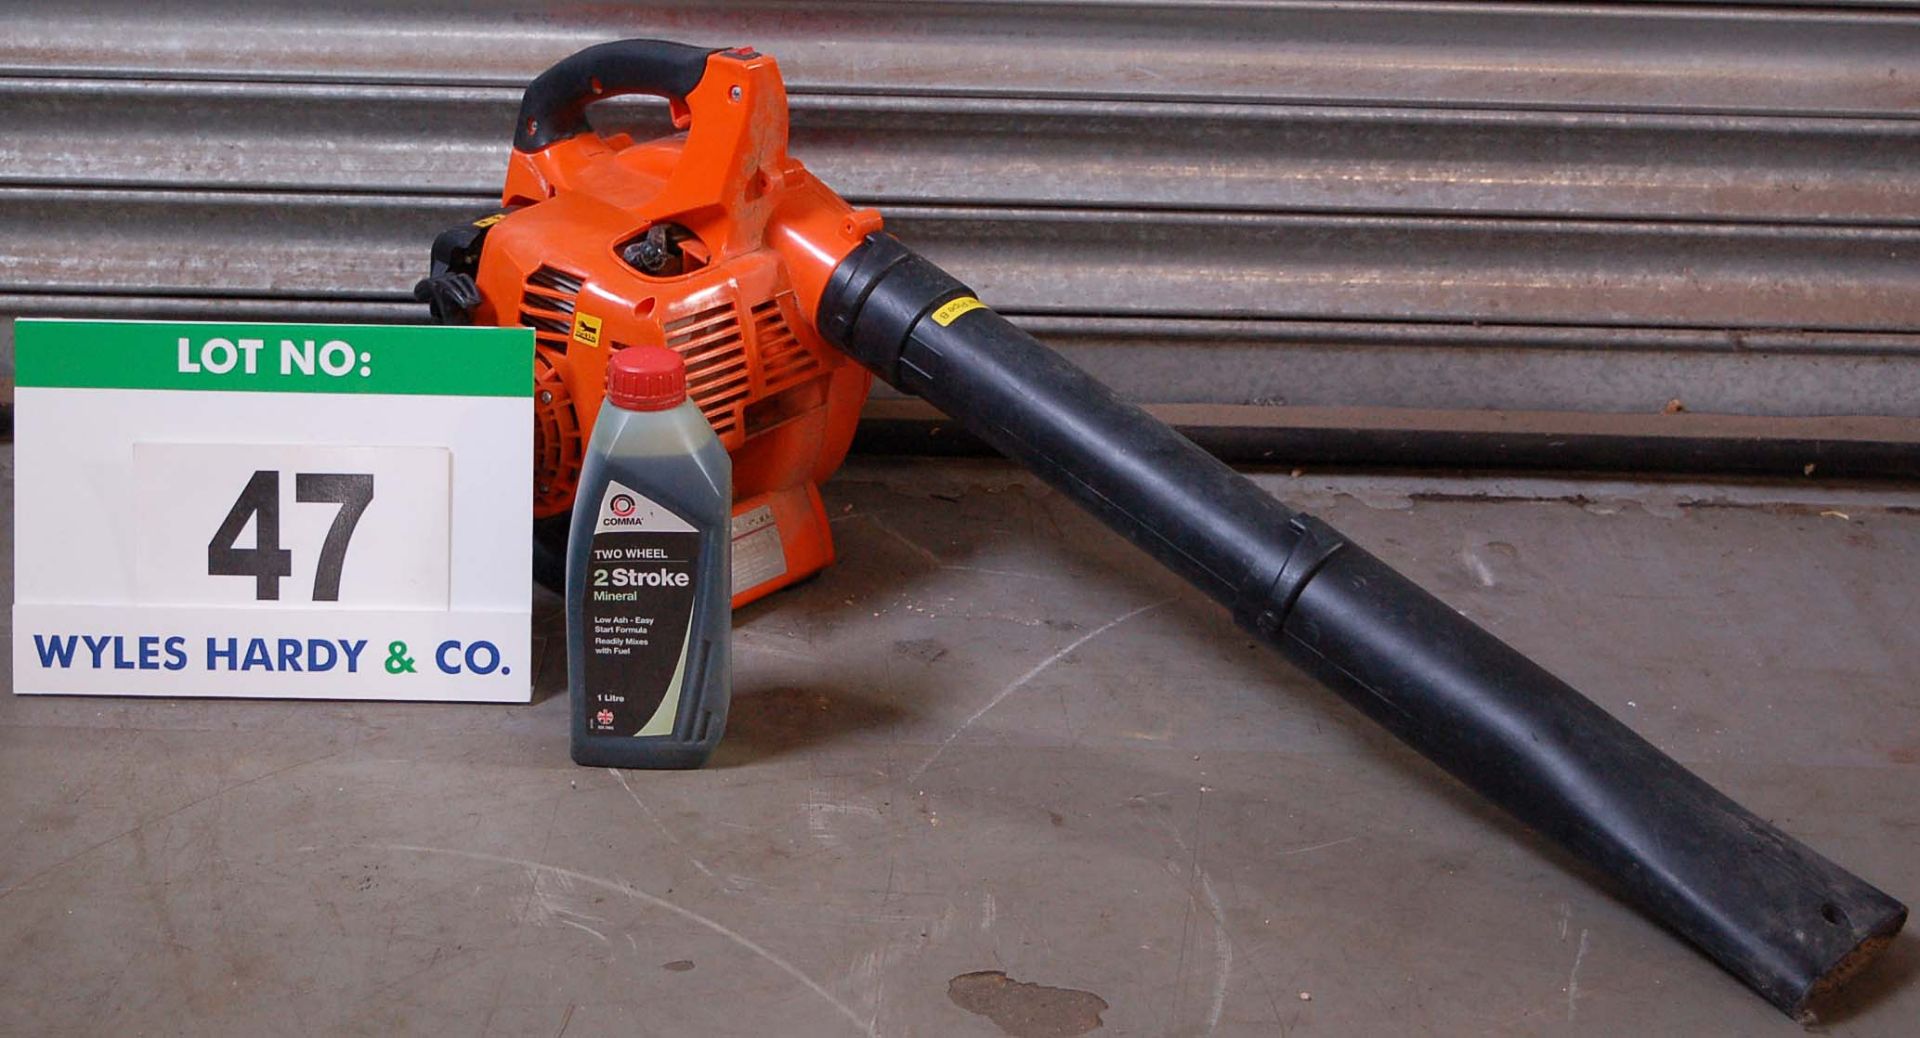 A PARKER PGBV-2600 Petrol Powered (2T) Hand Held Leaf Blower with A Bottle of 2-Stroke Oil